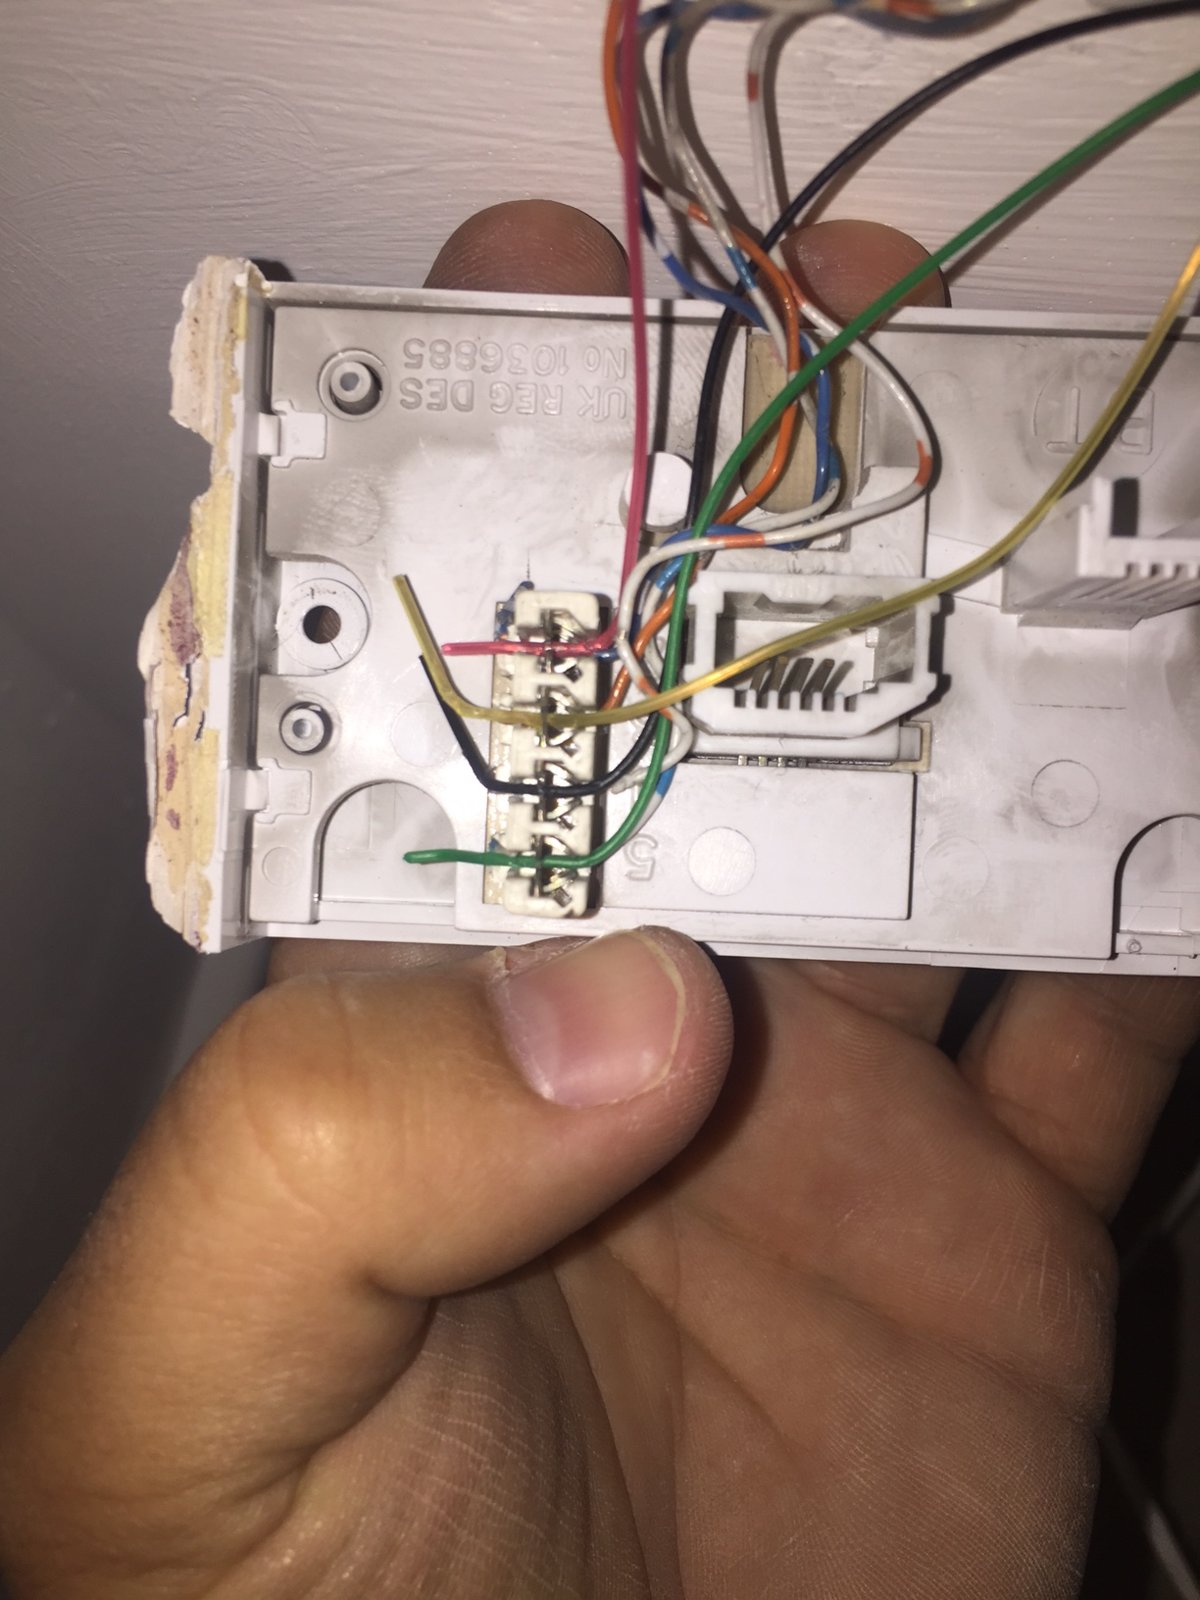 Telephone socket extension wiring question | DIYnot Forums